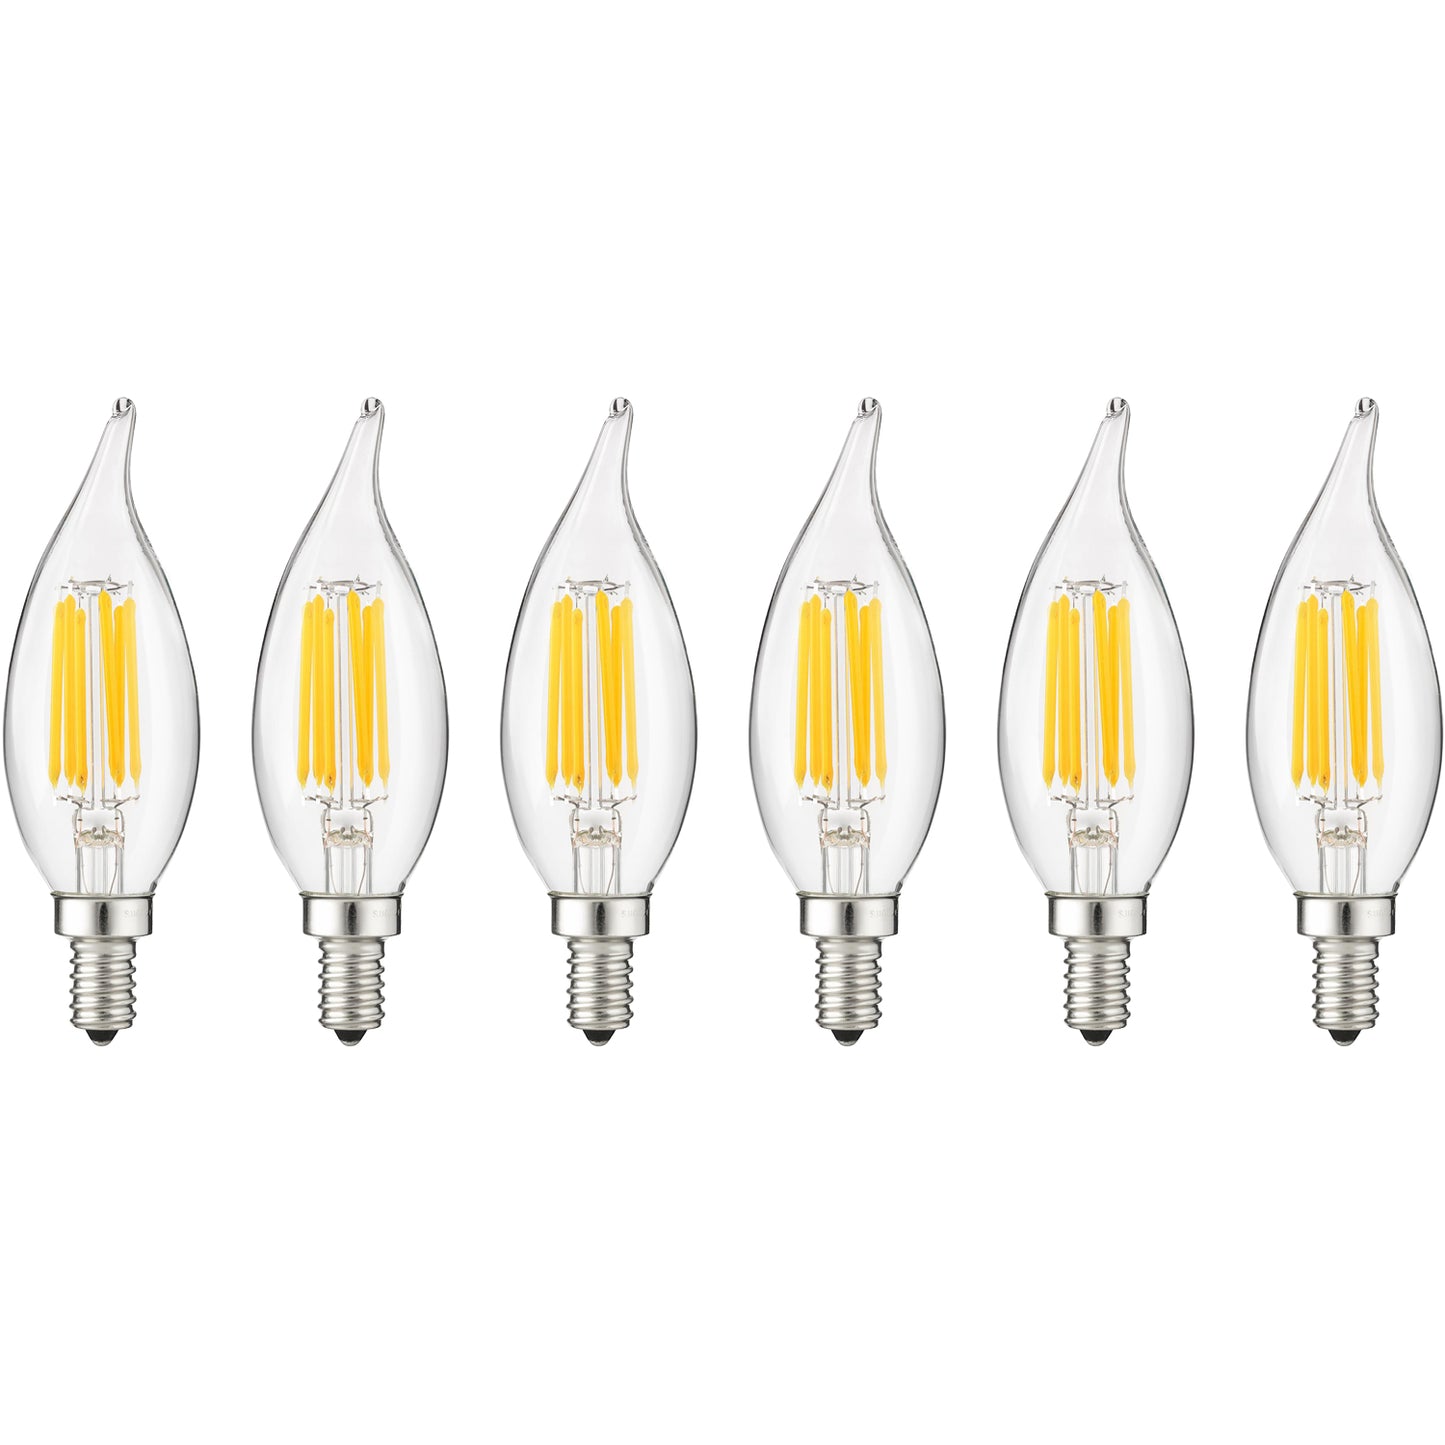 Sunlite CFC/LED/AQ/6W/E12/D/CL/E/27K LED 6W (60W Equivalent) Clear Filament Styled CFC Chandelier Light Bulbs With Flame Tip, 2700K Warm White Light, Candelabra (E12) Base